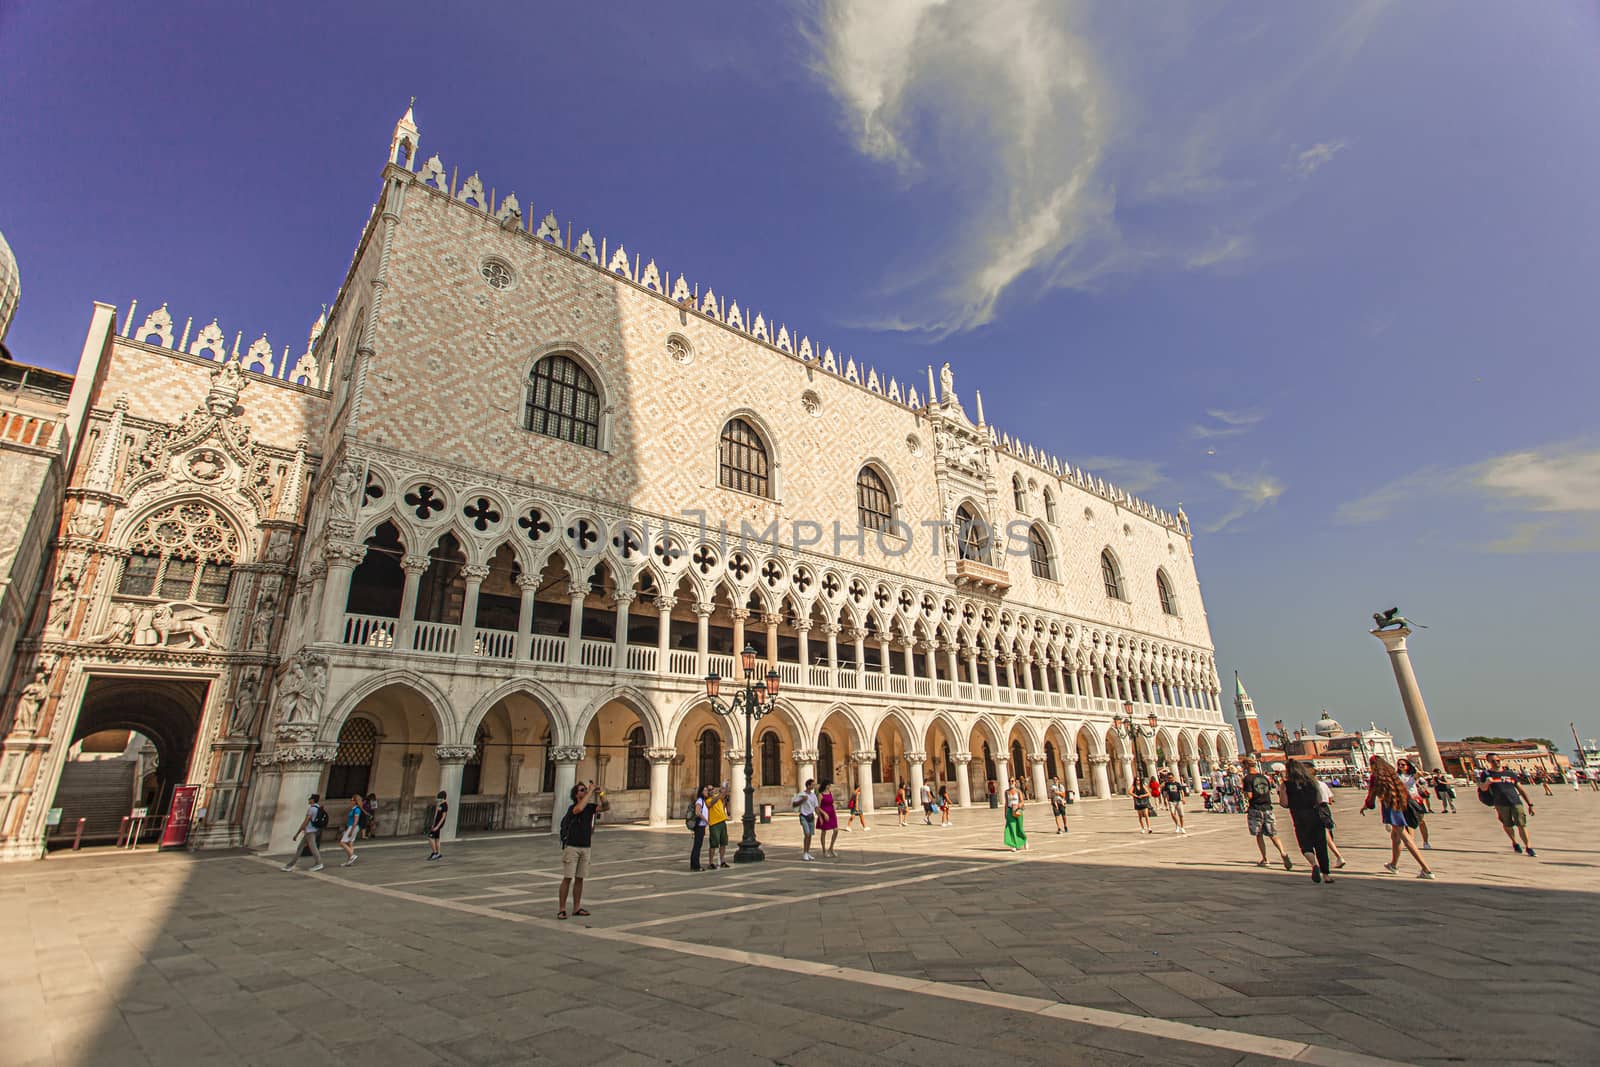 VENICE, ITALY 2 JULY 2020: Palazzo Ducale in Venice with people walking